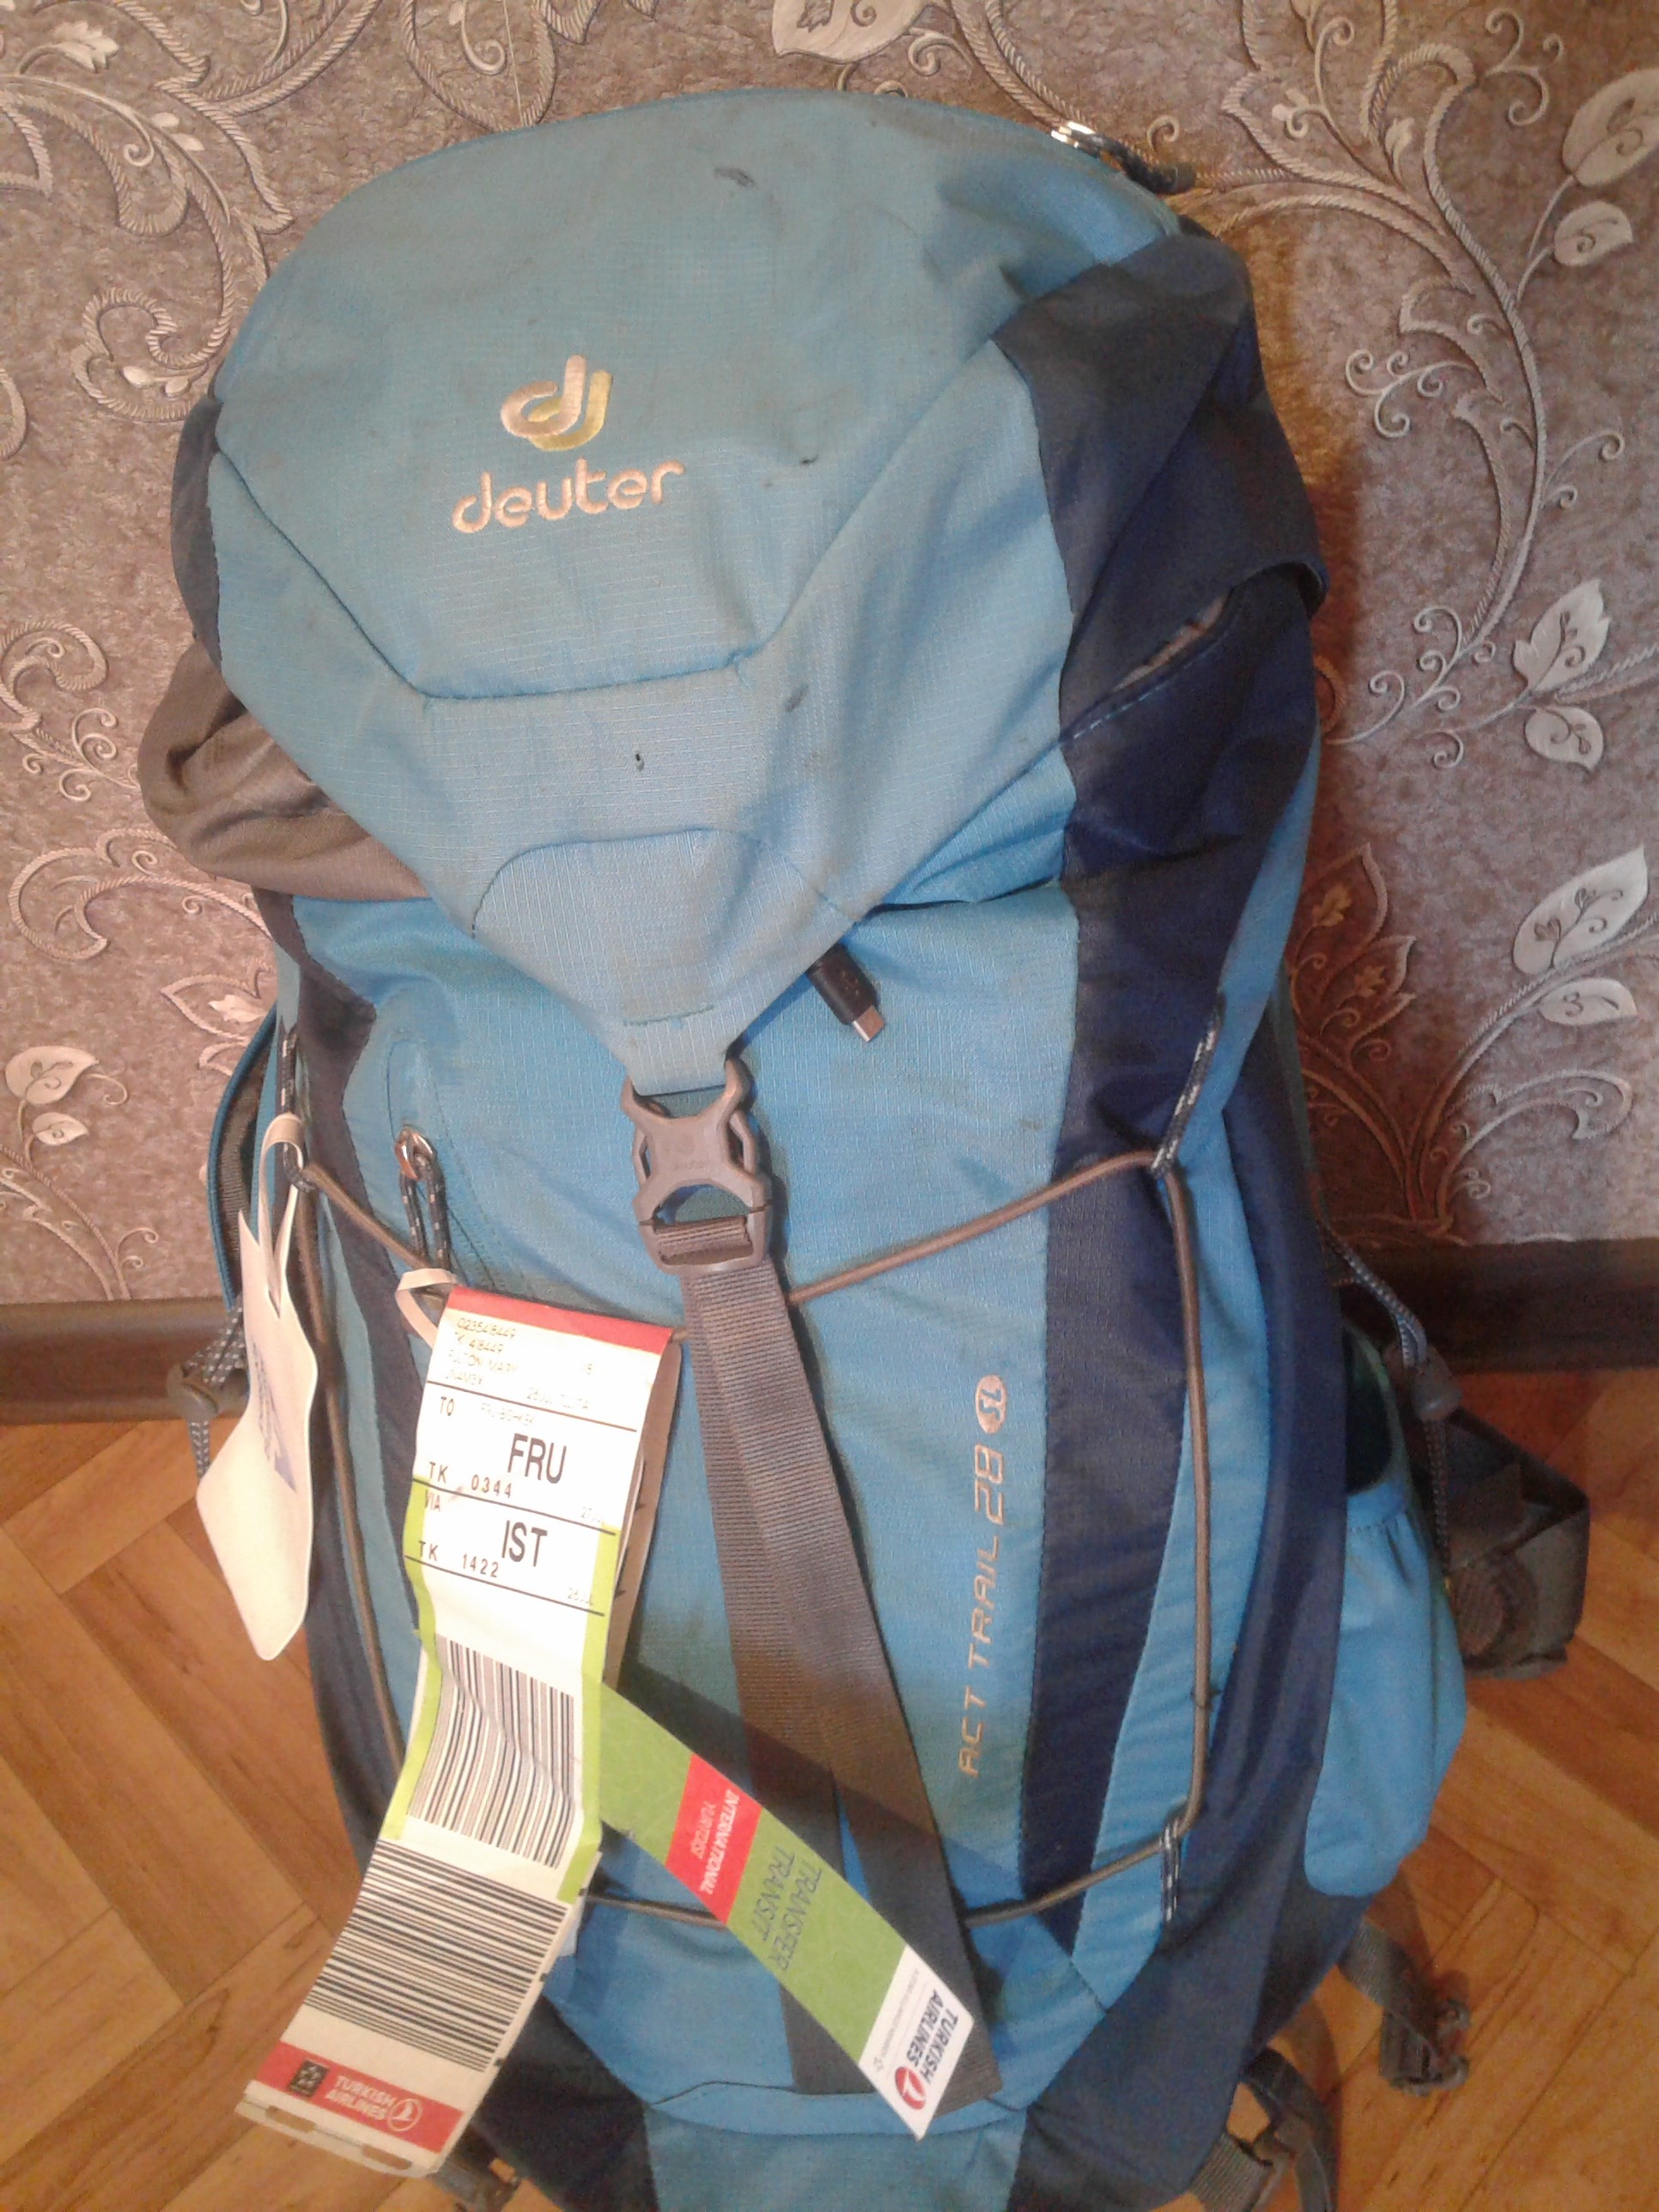 My backpack with checked-luggage tag indicating Bishkek as the destination